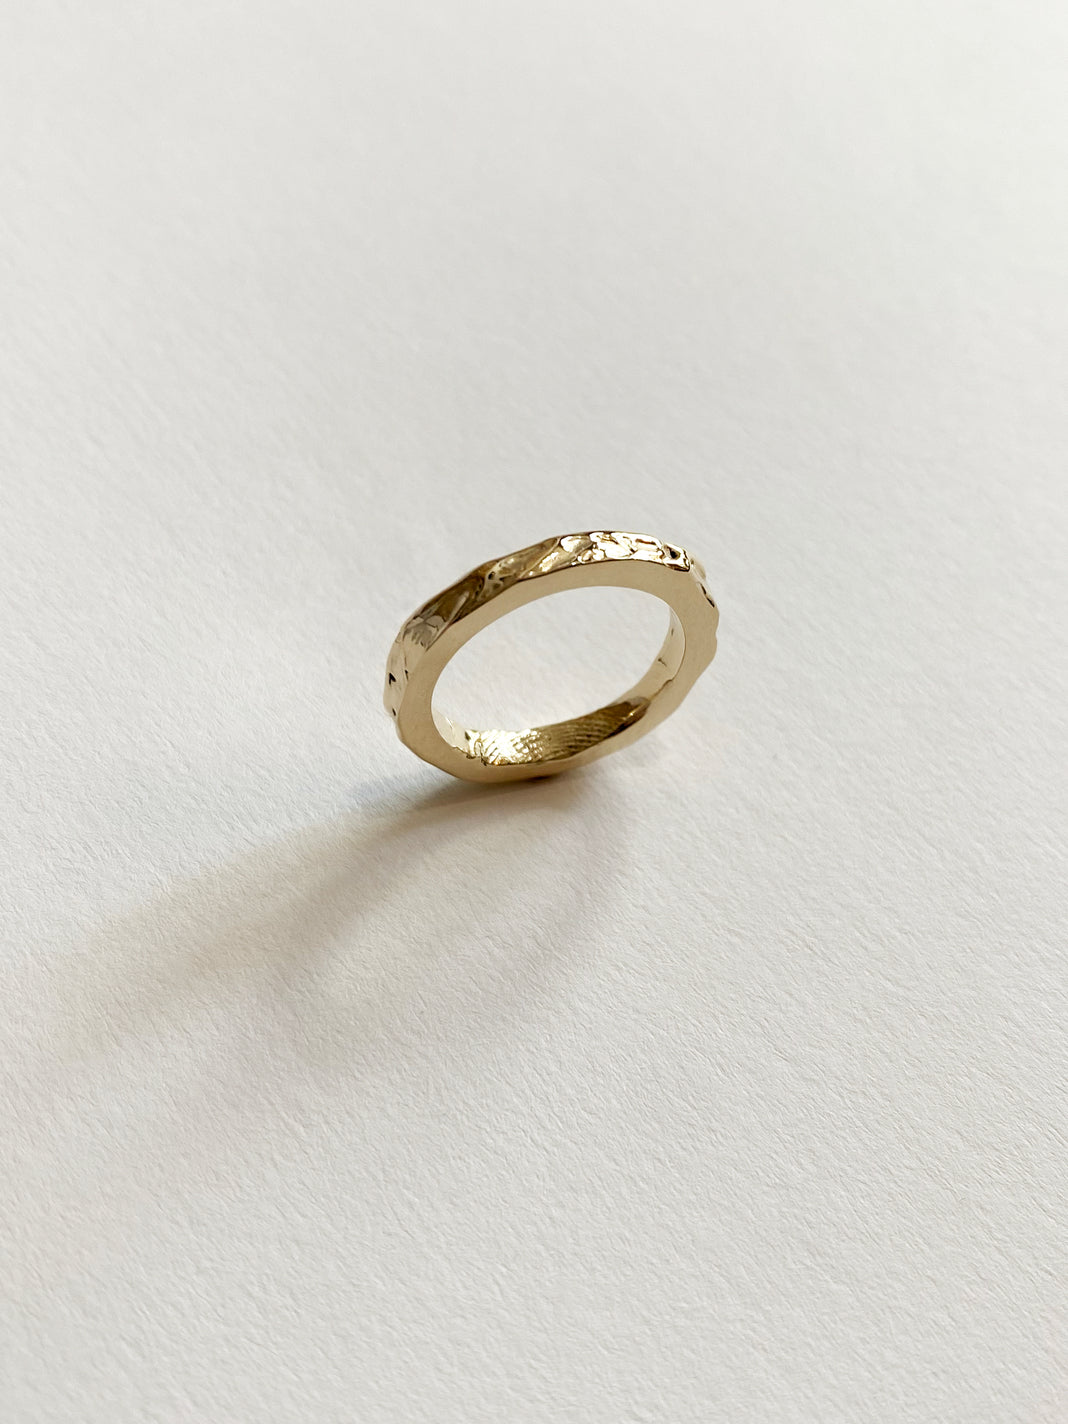 a shiny yellow gold band ring with a crinkled molten texture on the outside and a fingerprint on the inside on white background